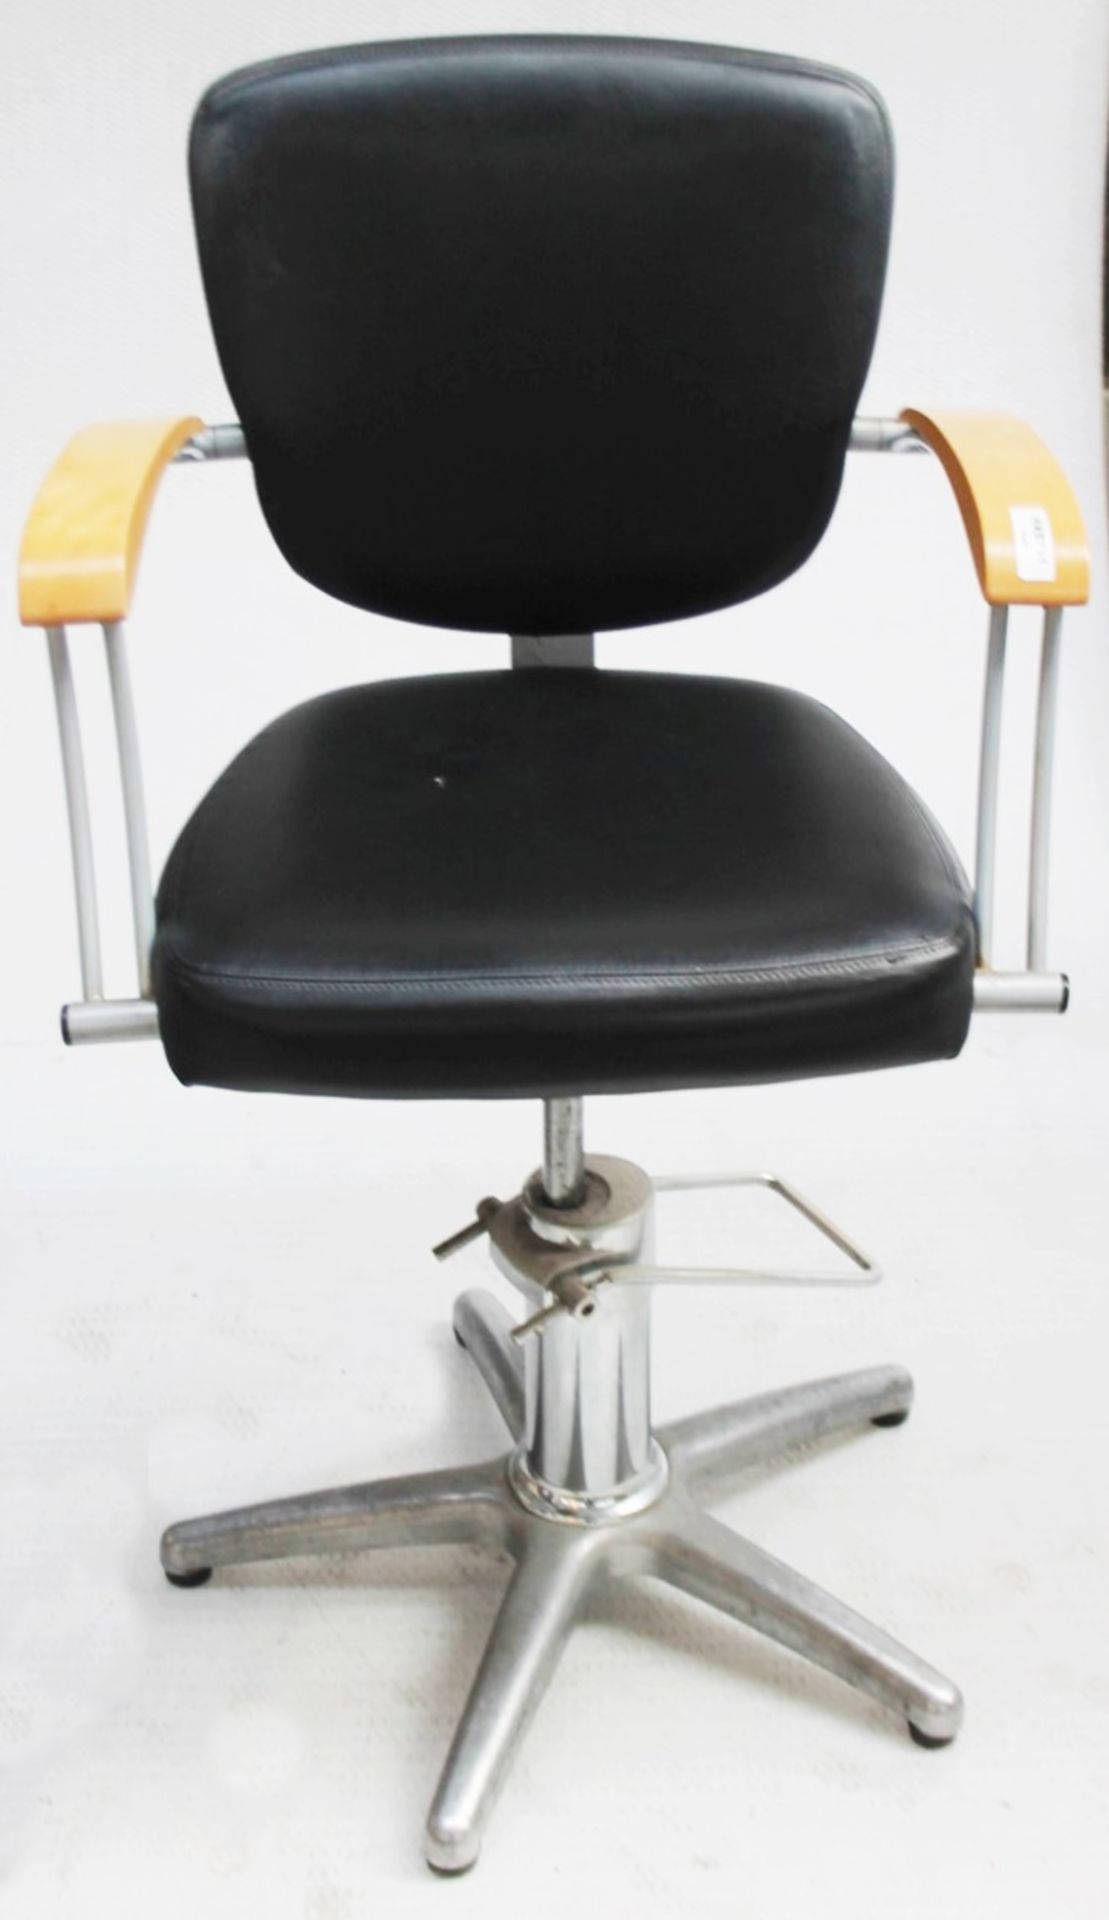 1 x Adjustable Black Hydraulic Barber Hairdressing Chair - Recently Removed From A Boutique Hair - Image 3 of 11